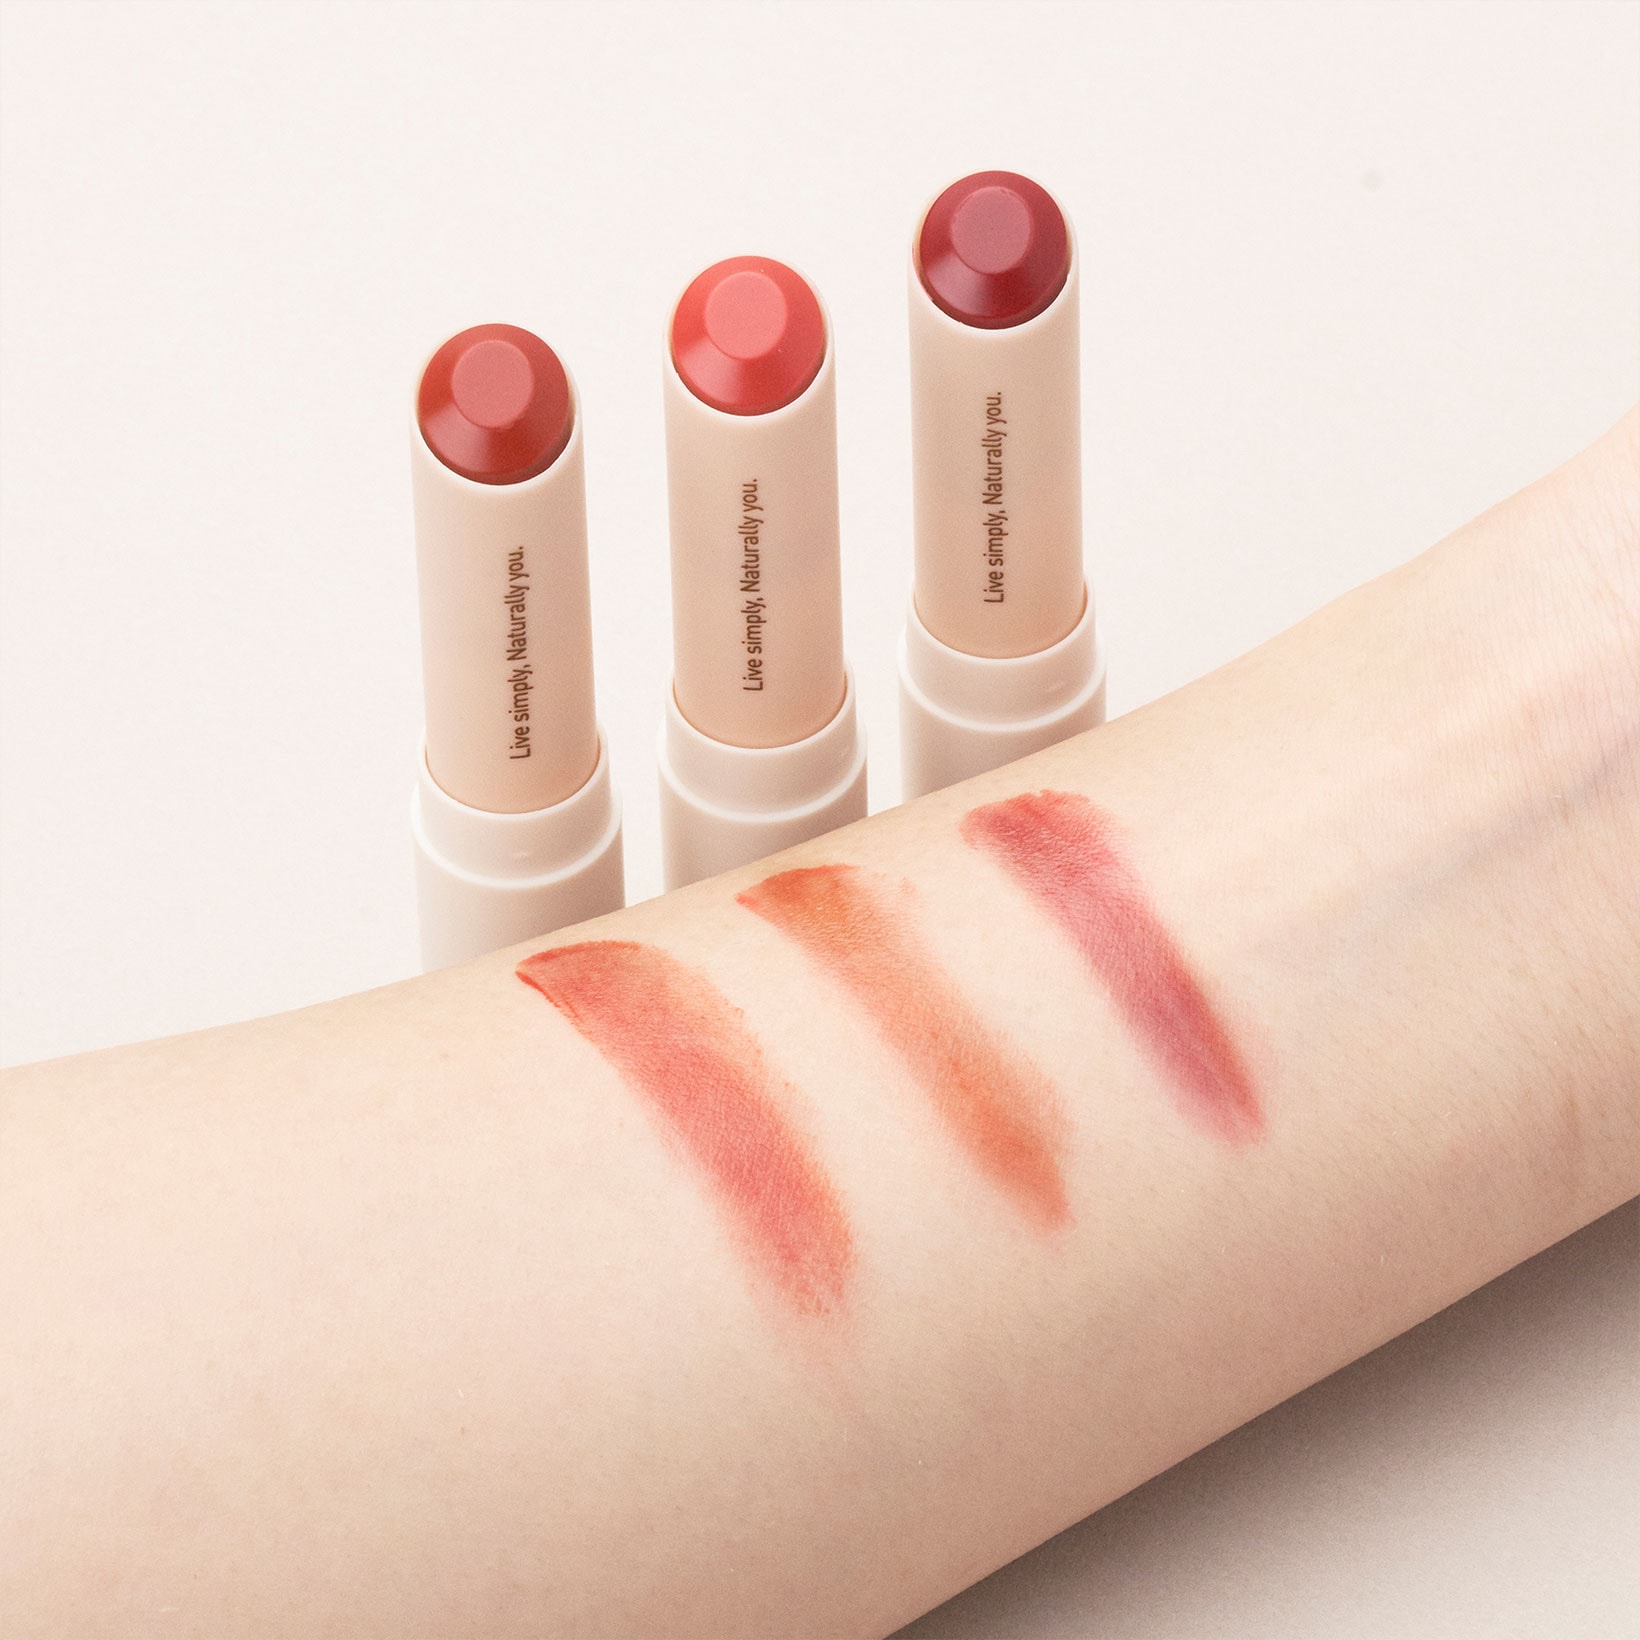 innisfree vegan makeup collection k-beauty simple label lip color balm three shades test swatch